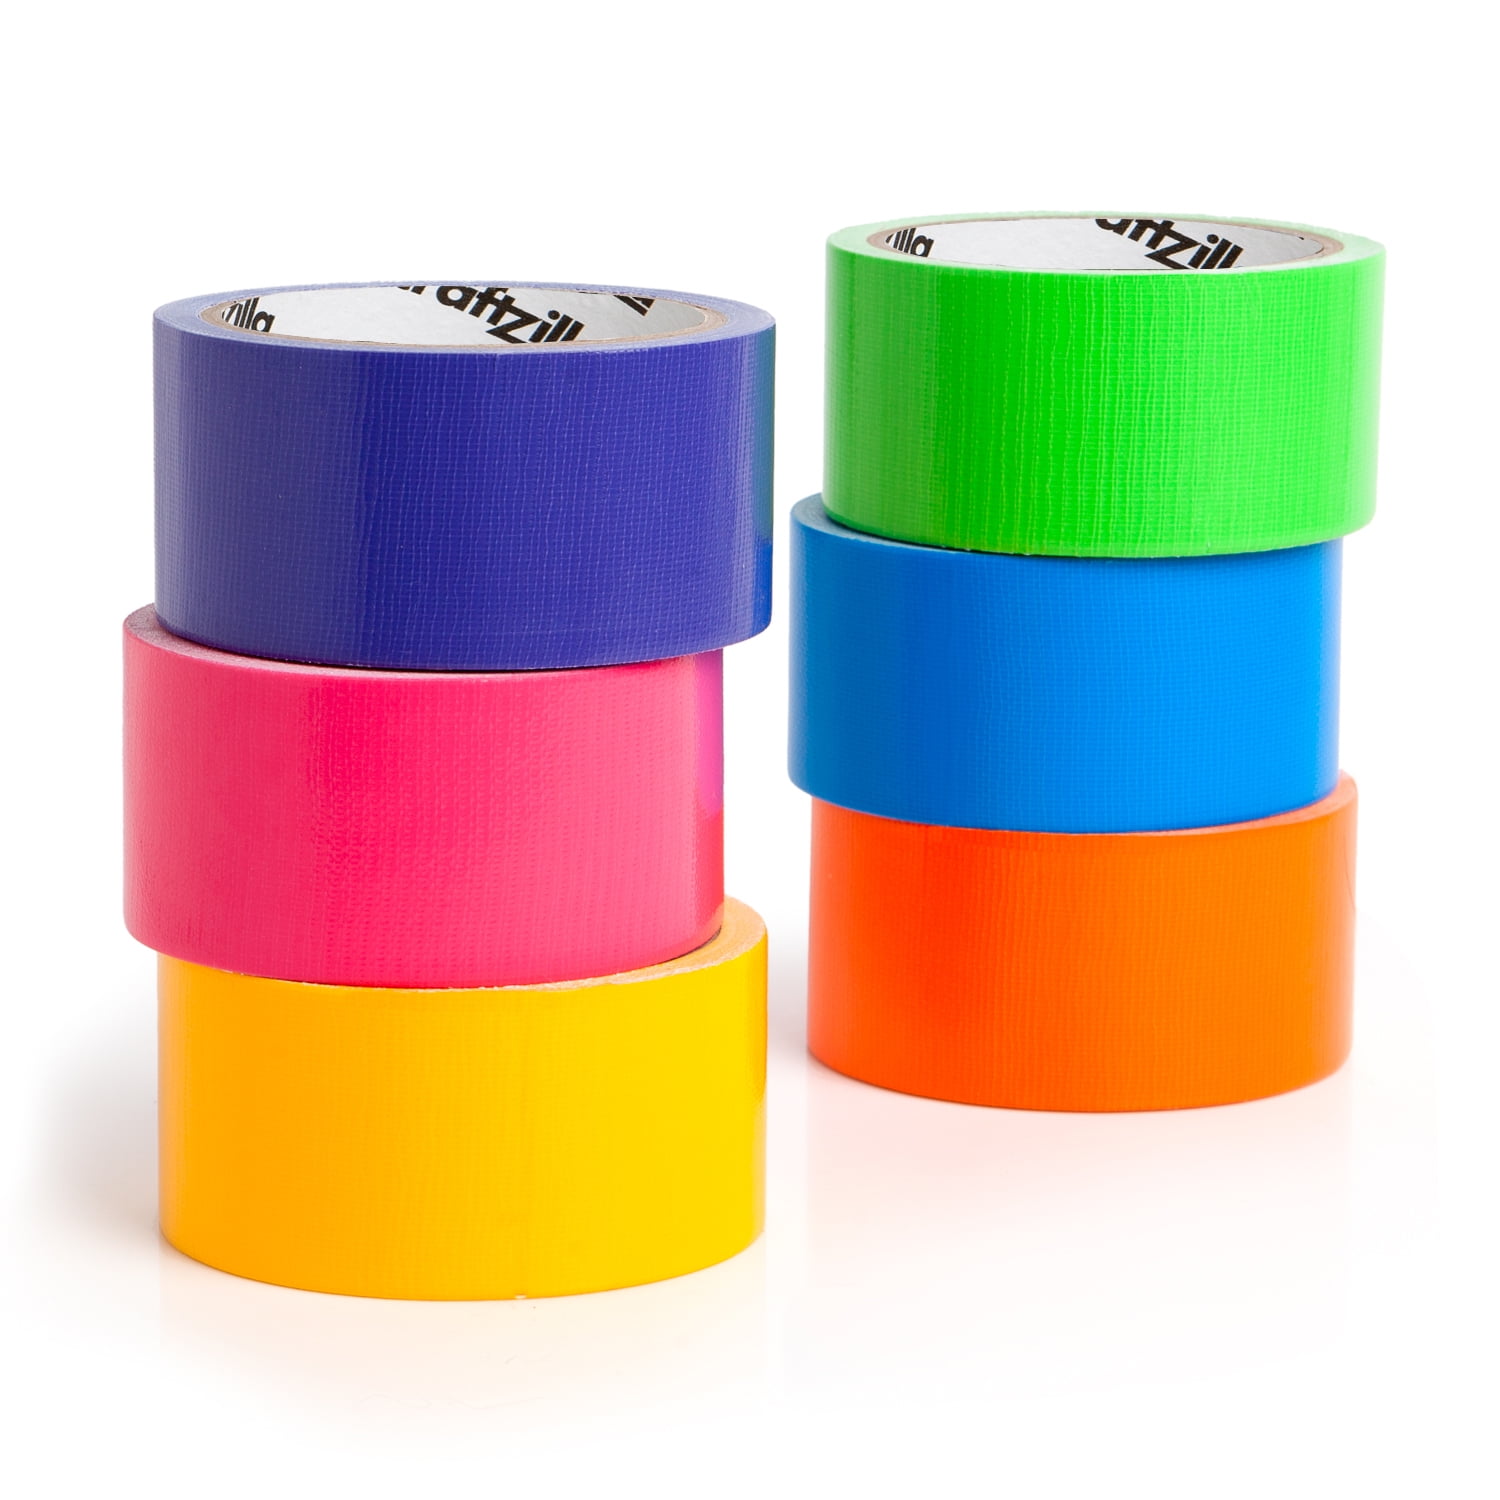 AMOGATO Colored Duct Tape - 1 inch x 10 Yards per Rolls,Multi-Color Duct Tapes, Rainbow Colored Duct Tape Great for DIY Art Home School Office